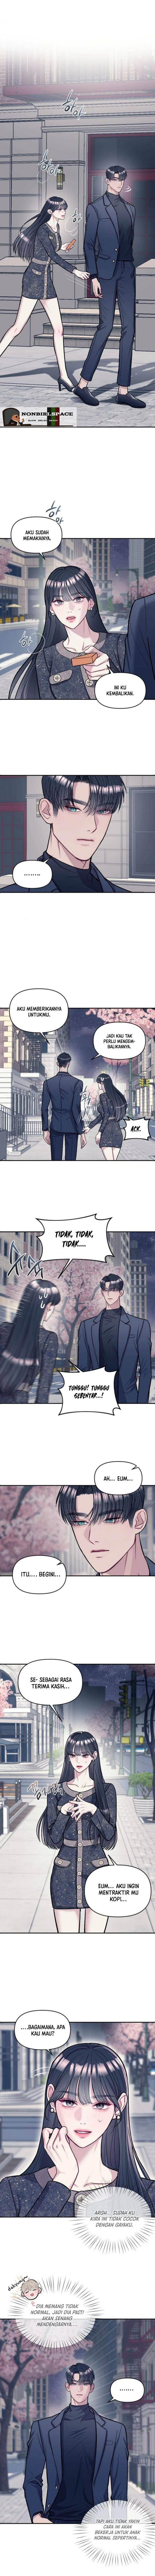 Undercover! Chaebol High School Chapter 06 - 57